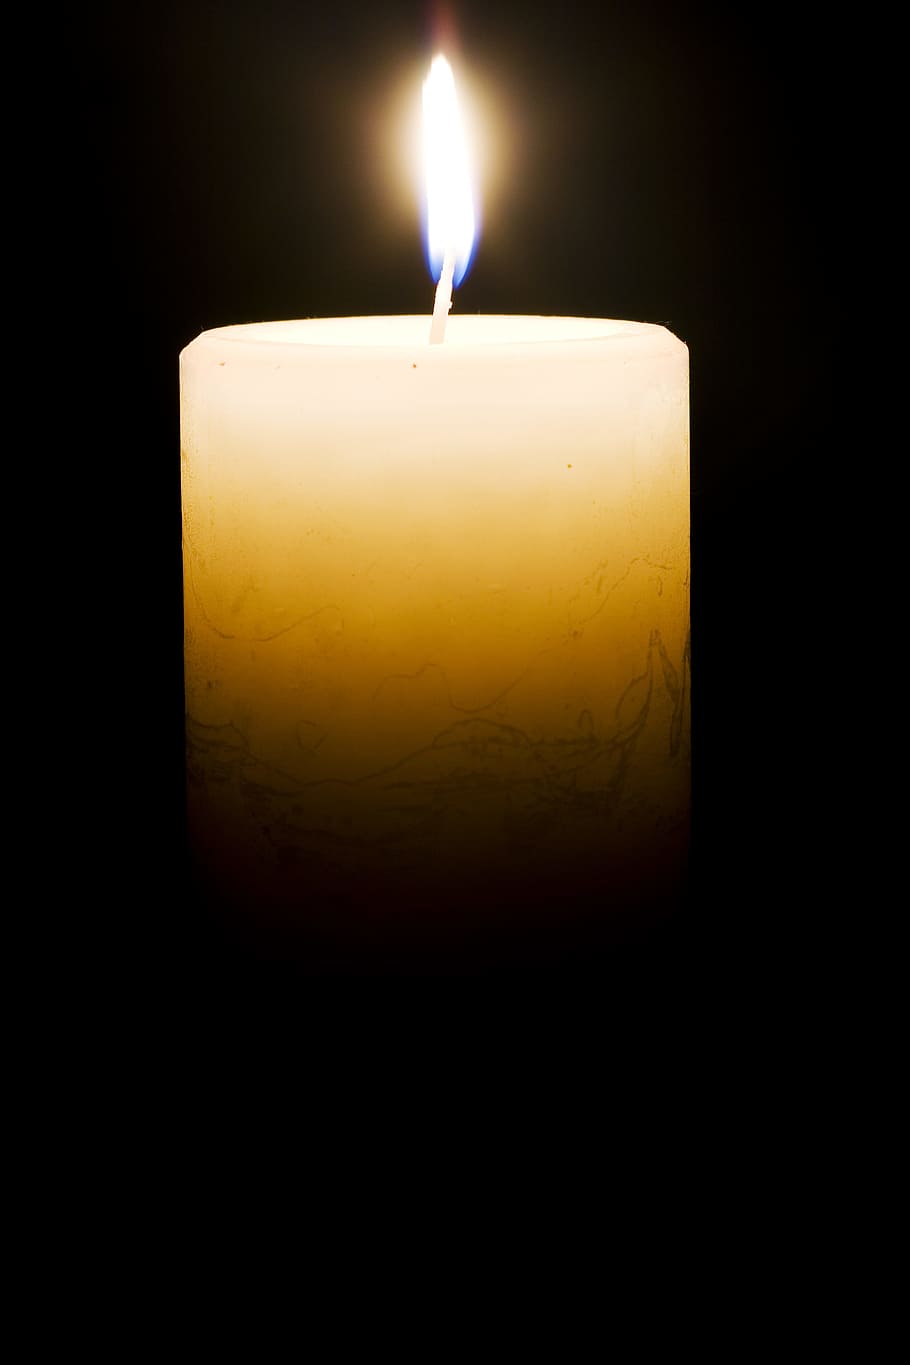 black, flame, background, church, wax, candlelight, decoration, white, glowing, yellow